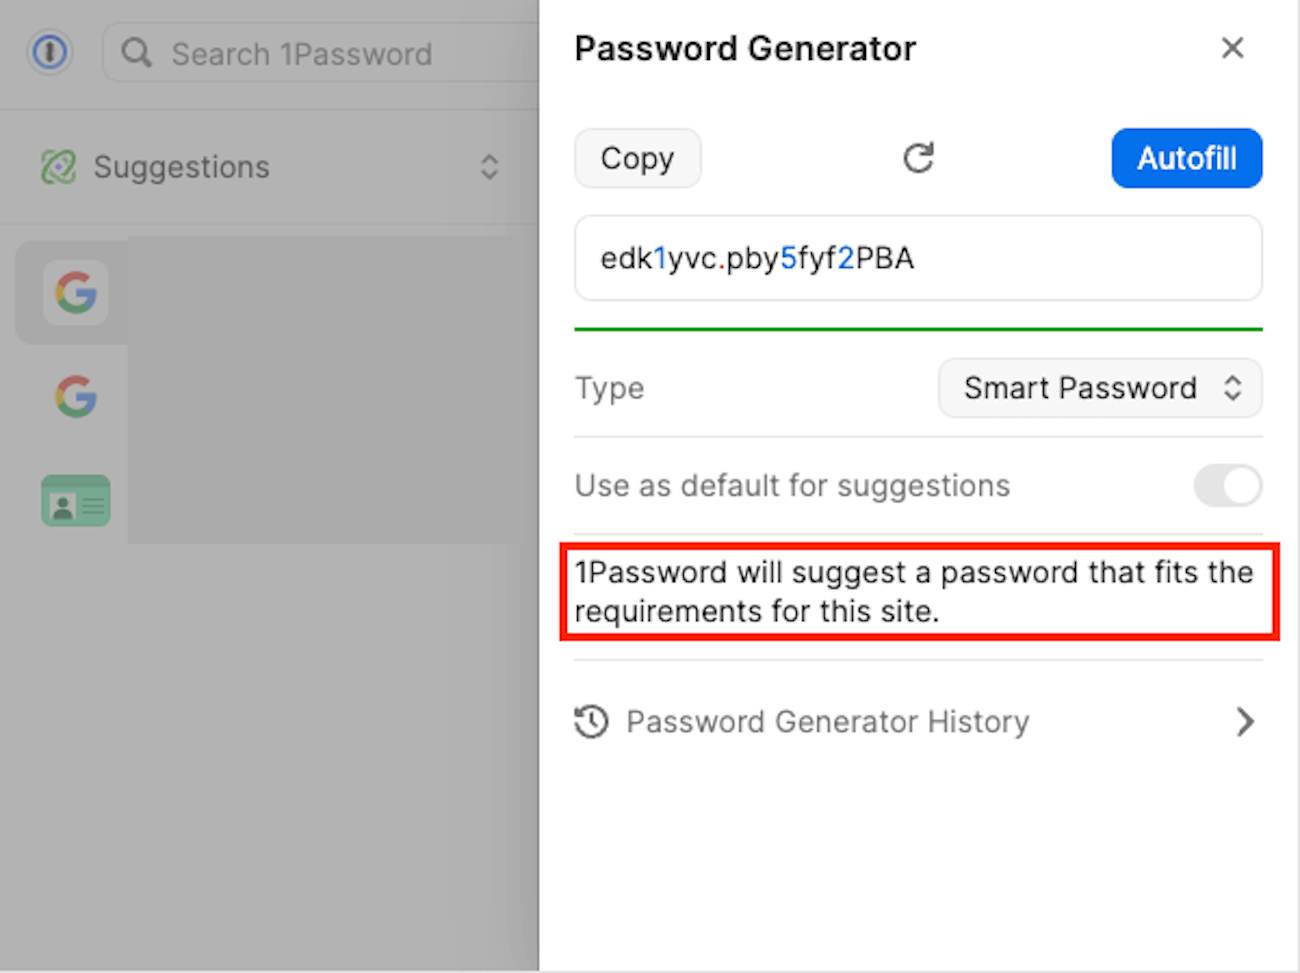 1Password's built-in password generator with the following passage highlighted: '1Password will suggest a password that fits the requirements for this site.'